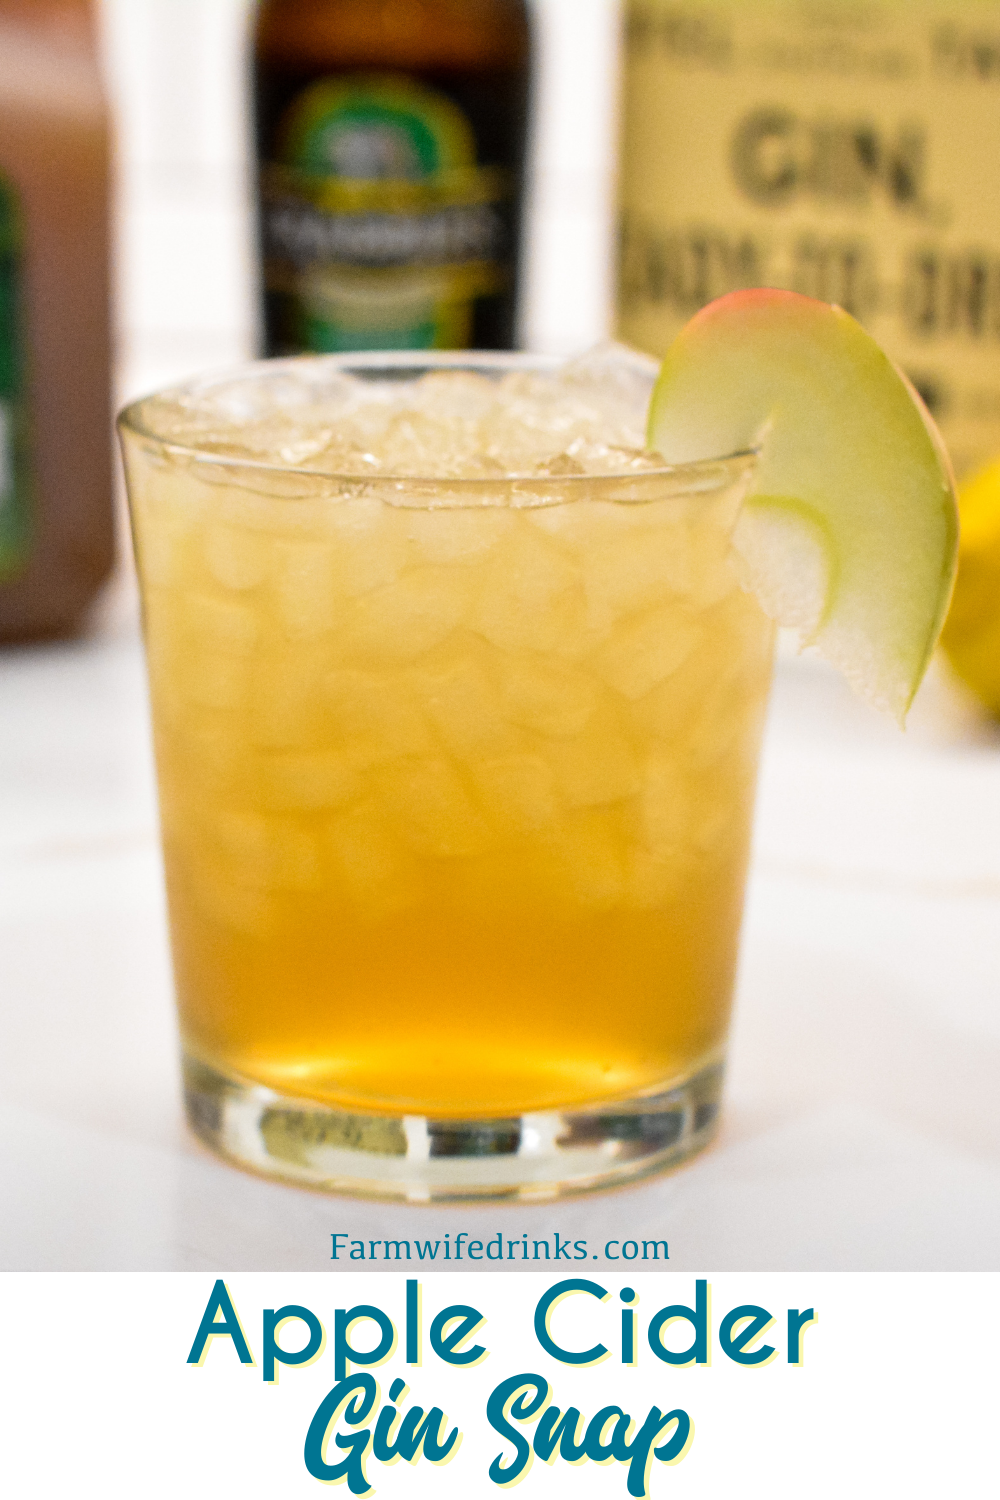 Apple cider gin snap is a gin variation to the a Moscow mule with the combination of ginger beer, apple cider, gin, and lemon juice to create a ginger apple cider gin cocktail.